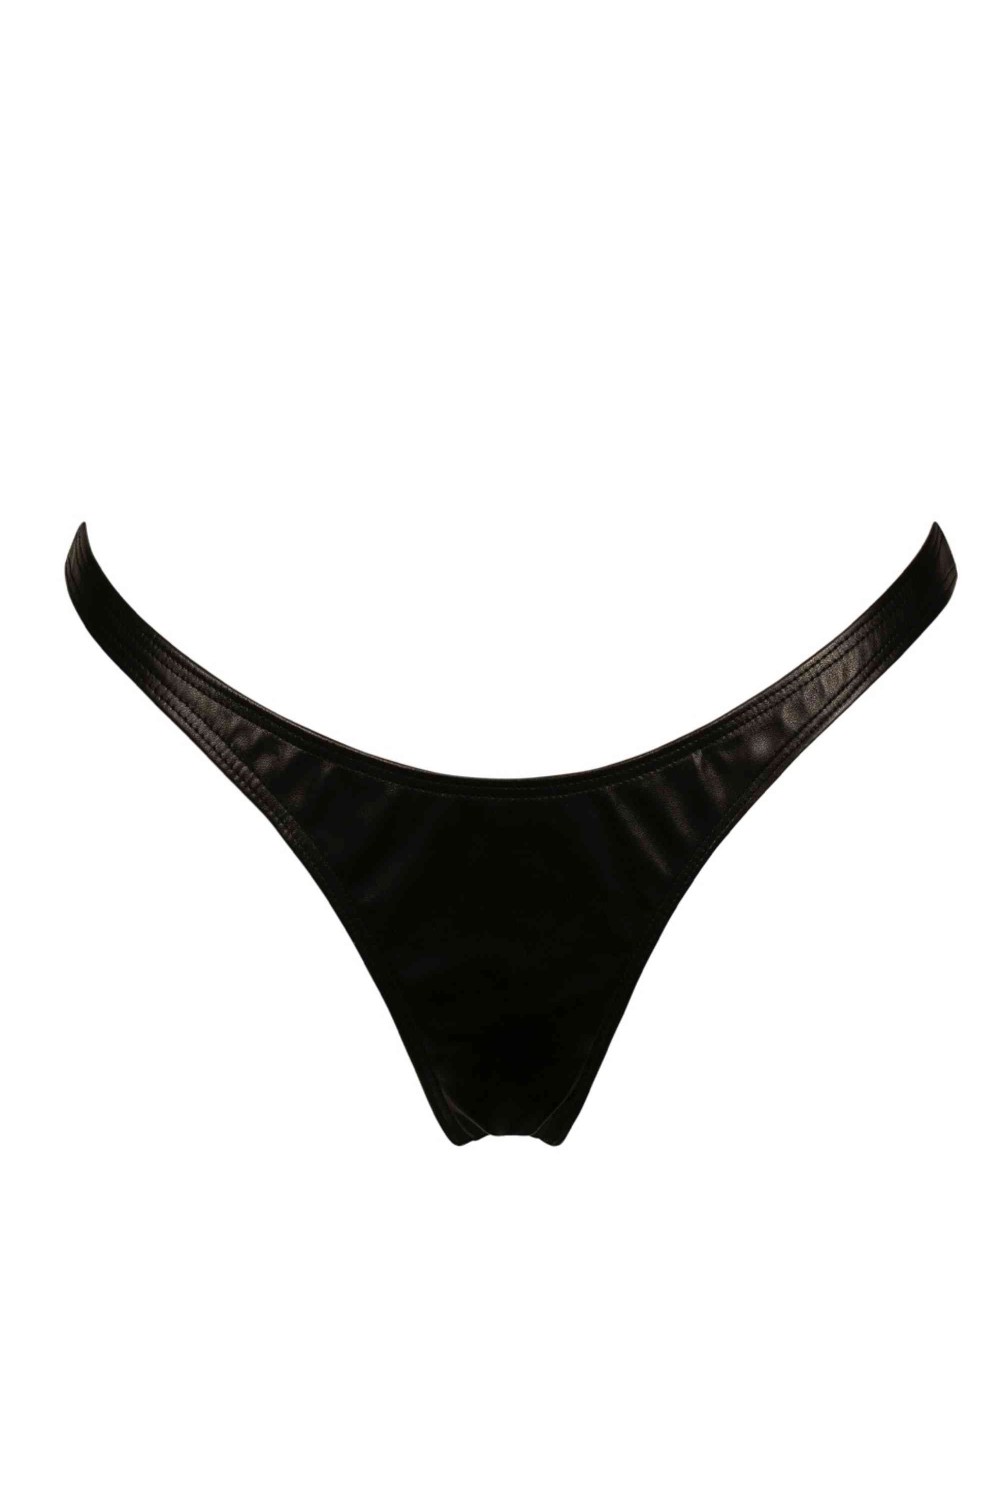 Underwear Female Low Waist PU Leather Panties Thong Underclothes